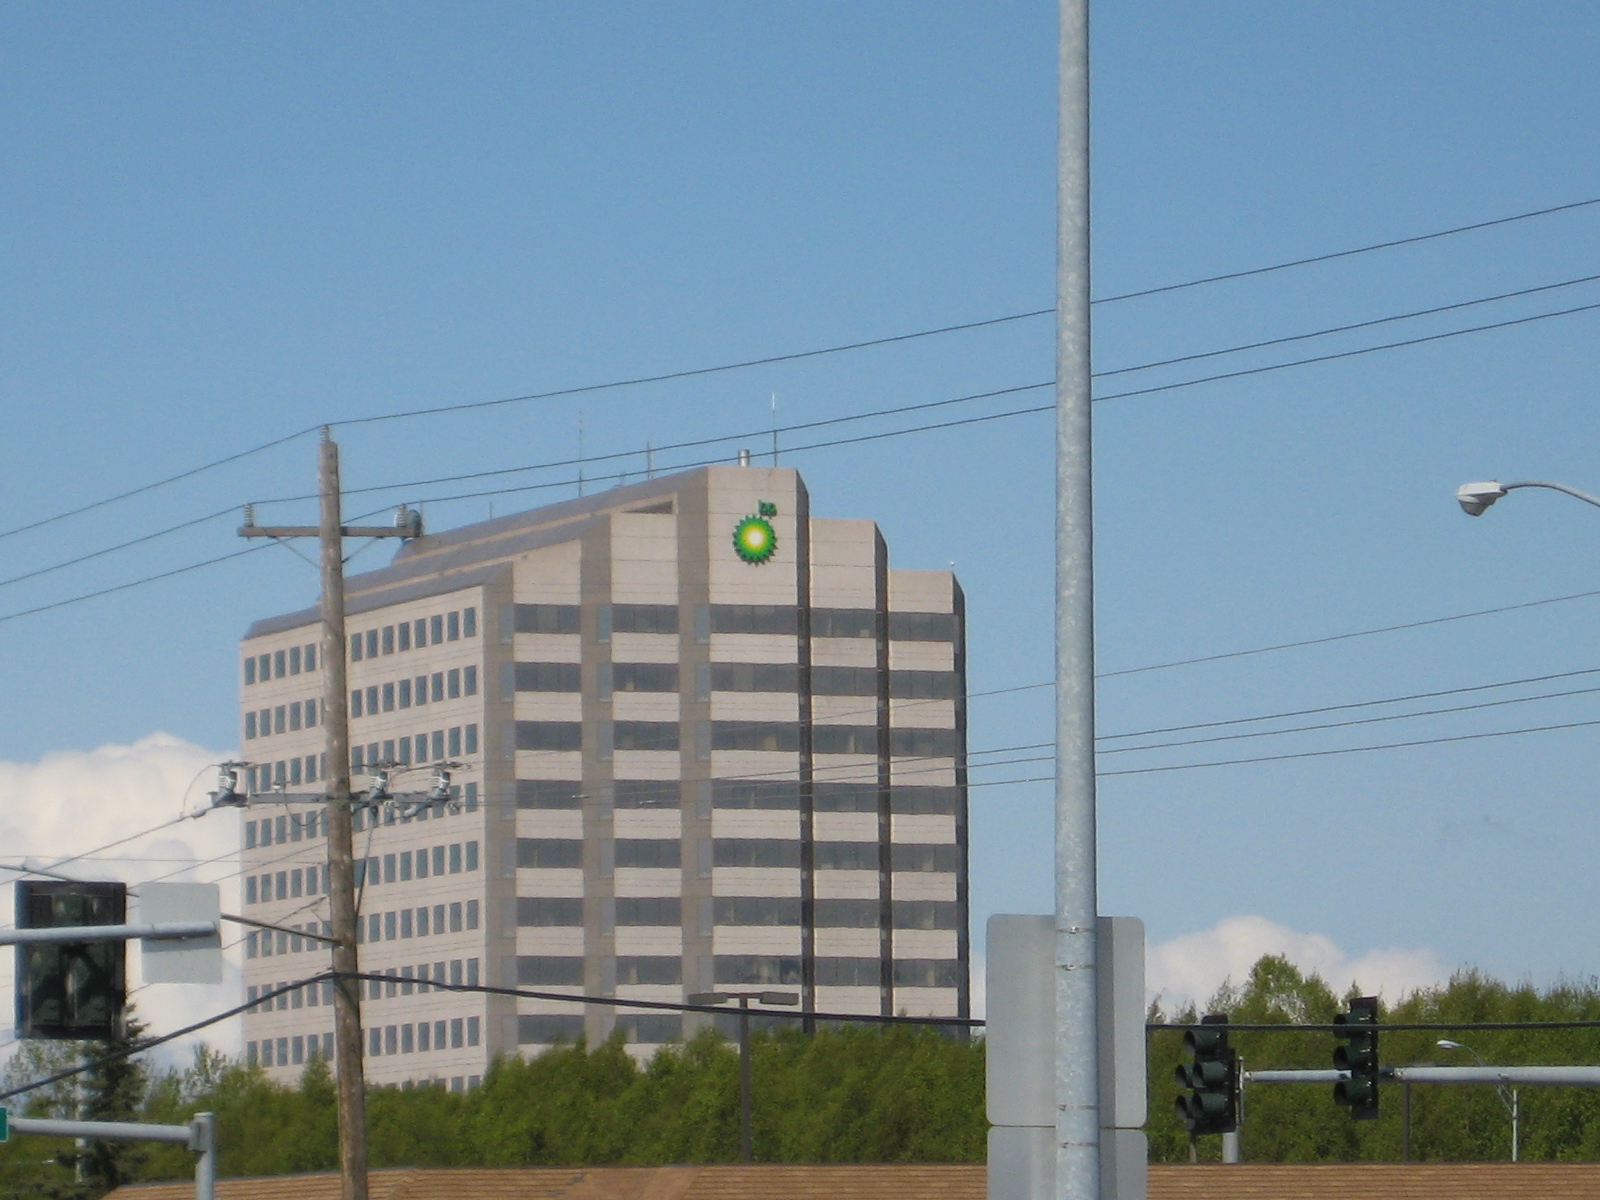 BP's Anchorage headquarters. Image: Wikimedia Commons